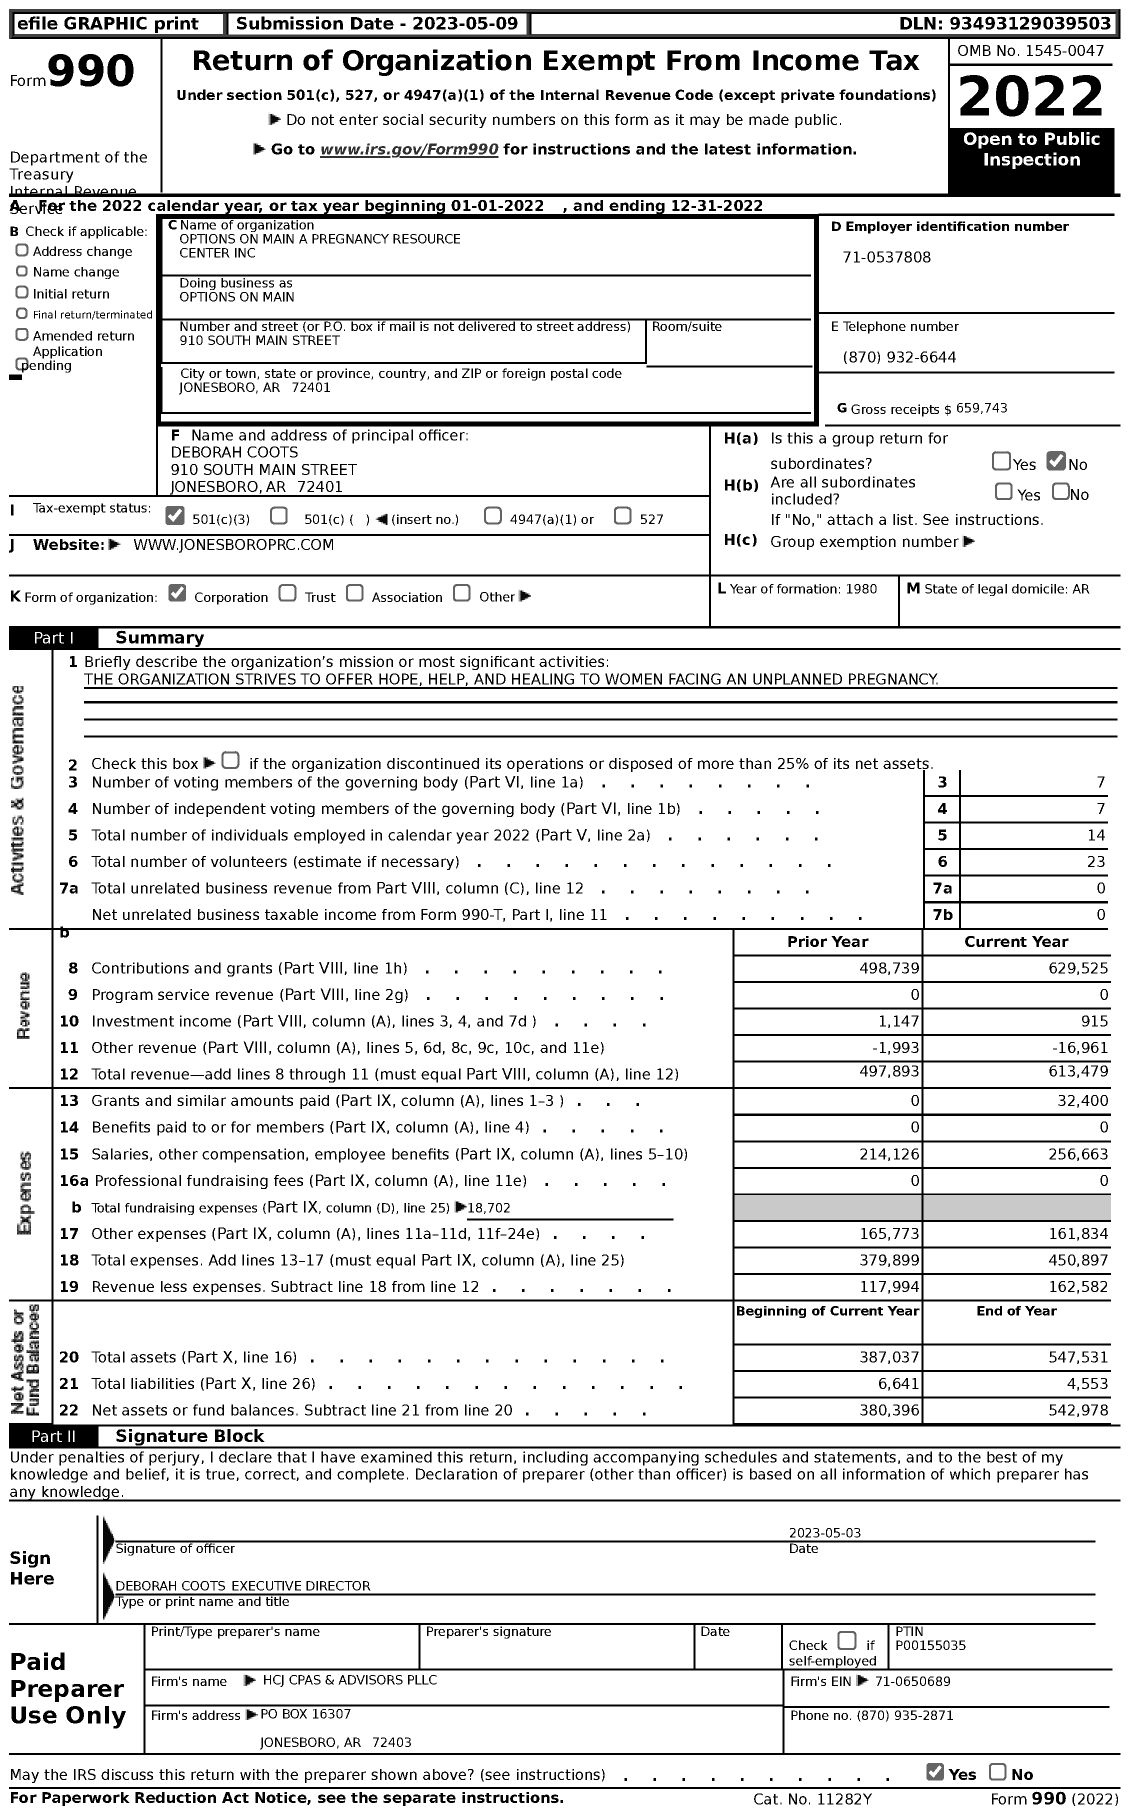 Image of first page of 2022 Form 990 for Options on Main